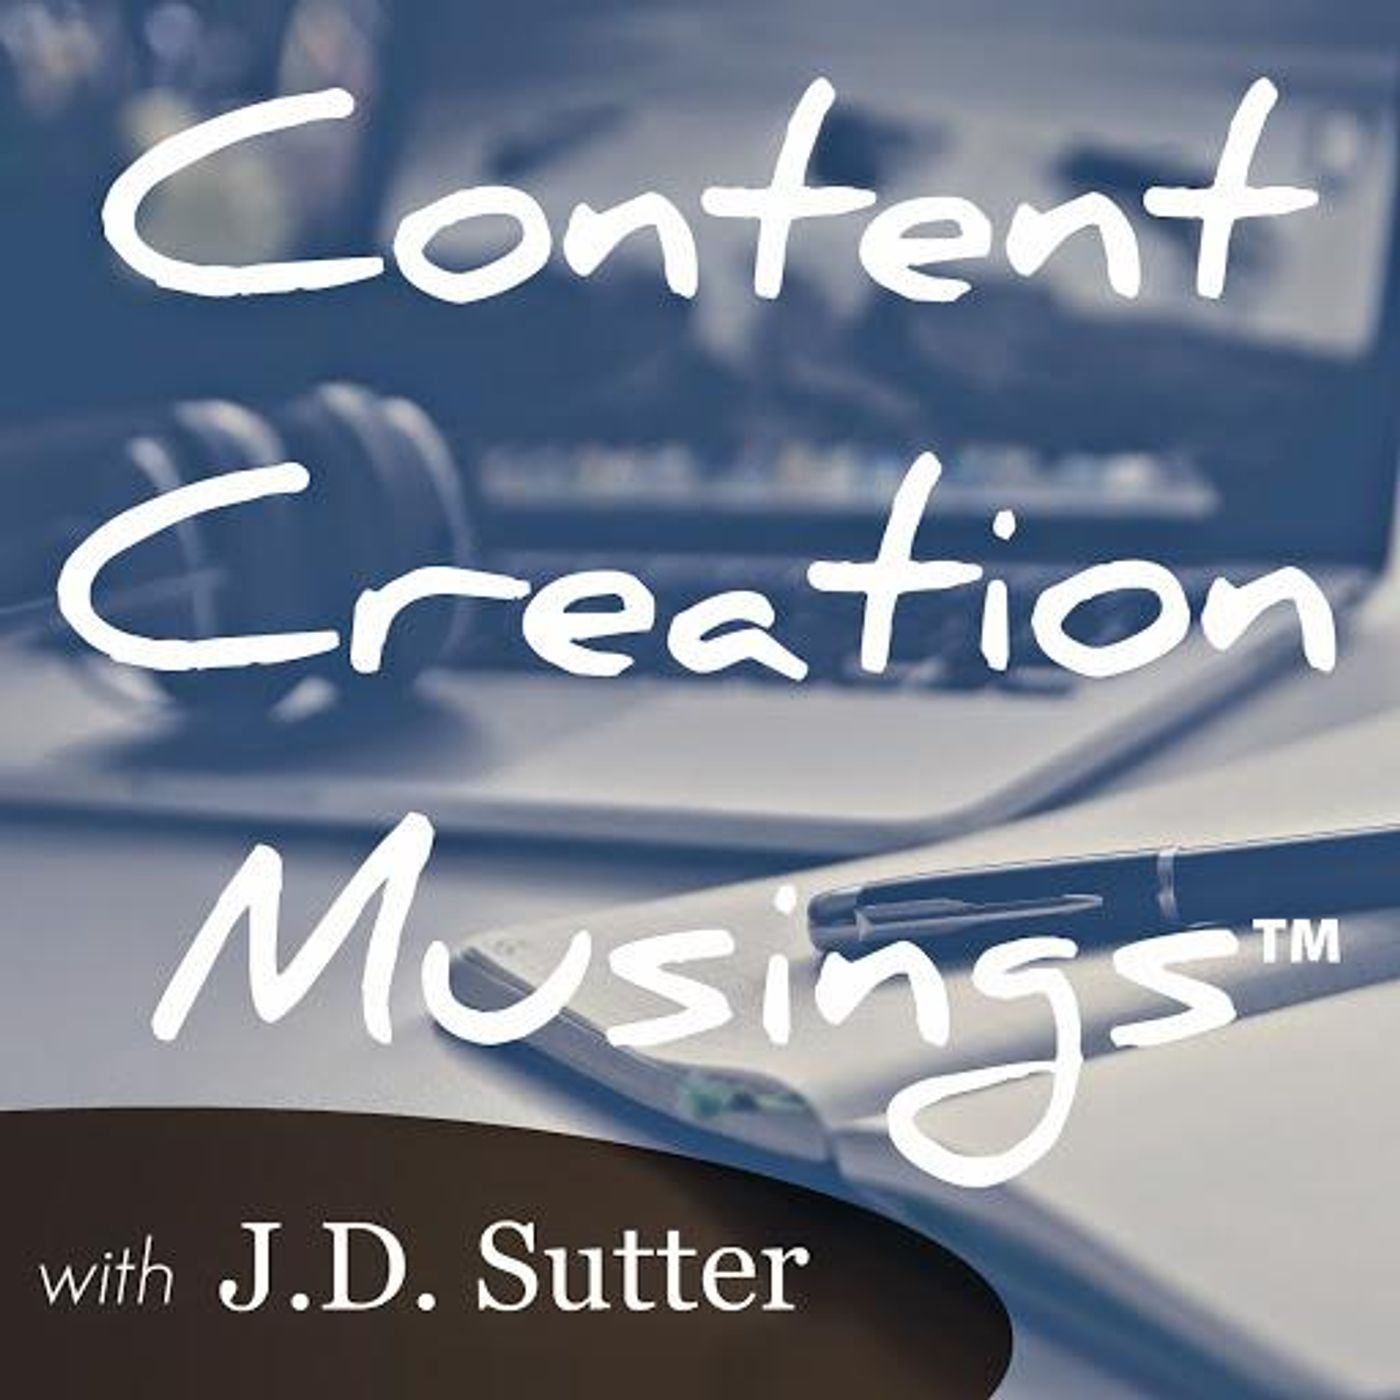 What is Content Creation Musings all about?